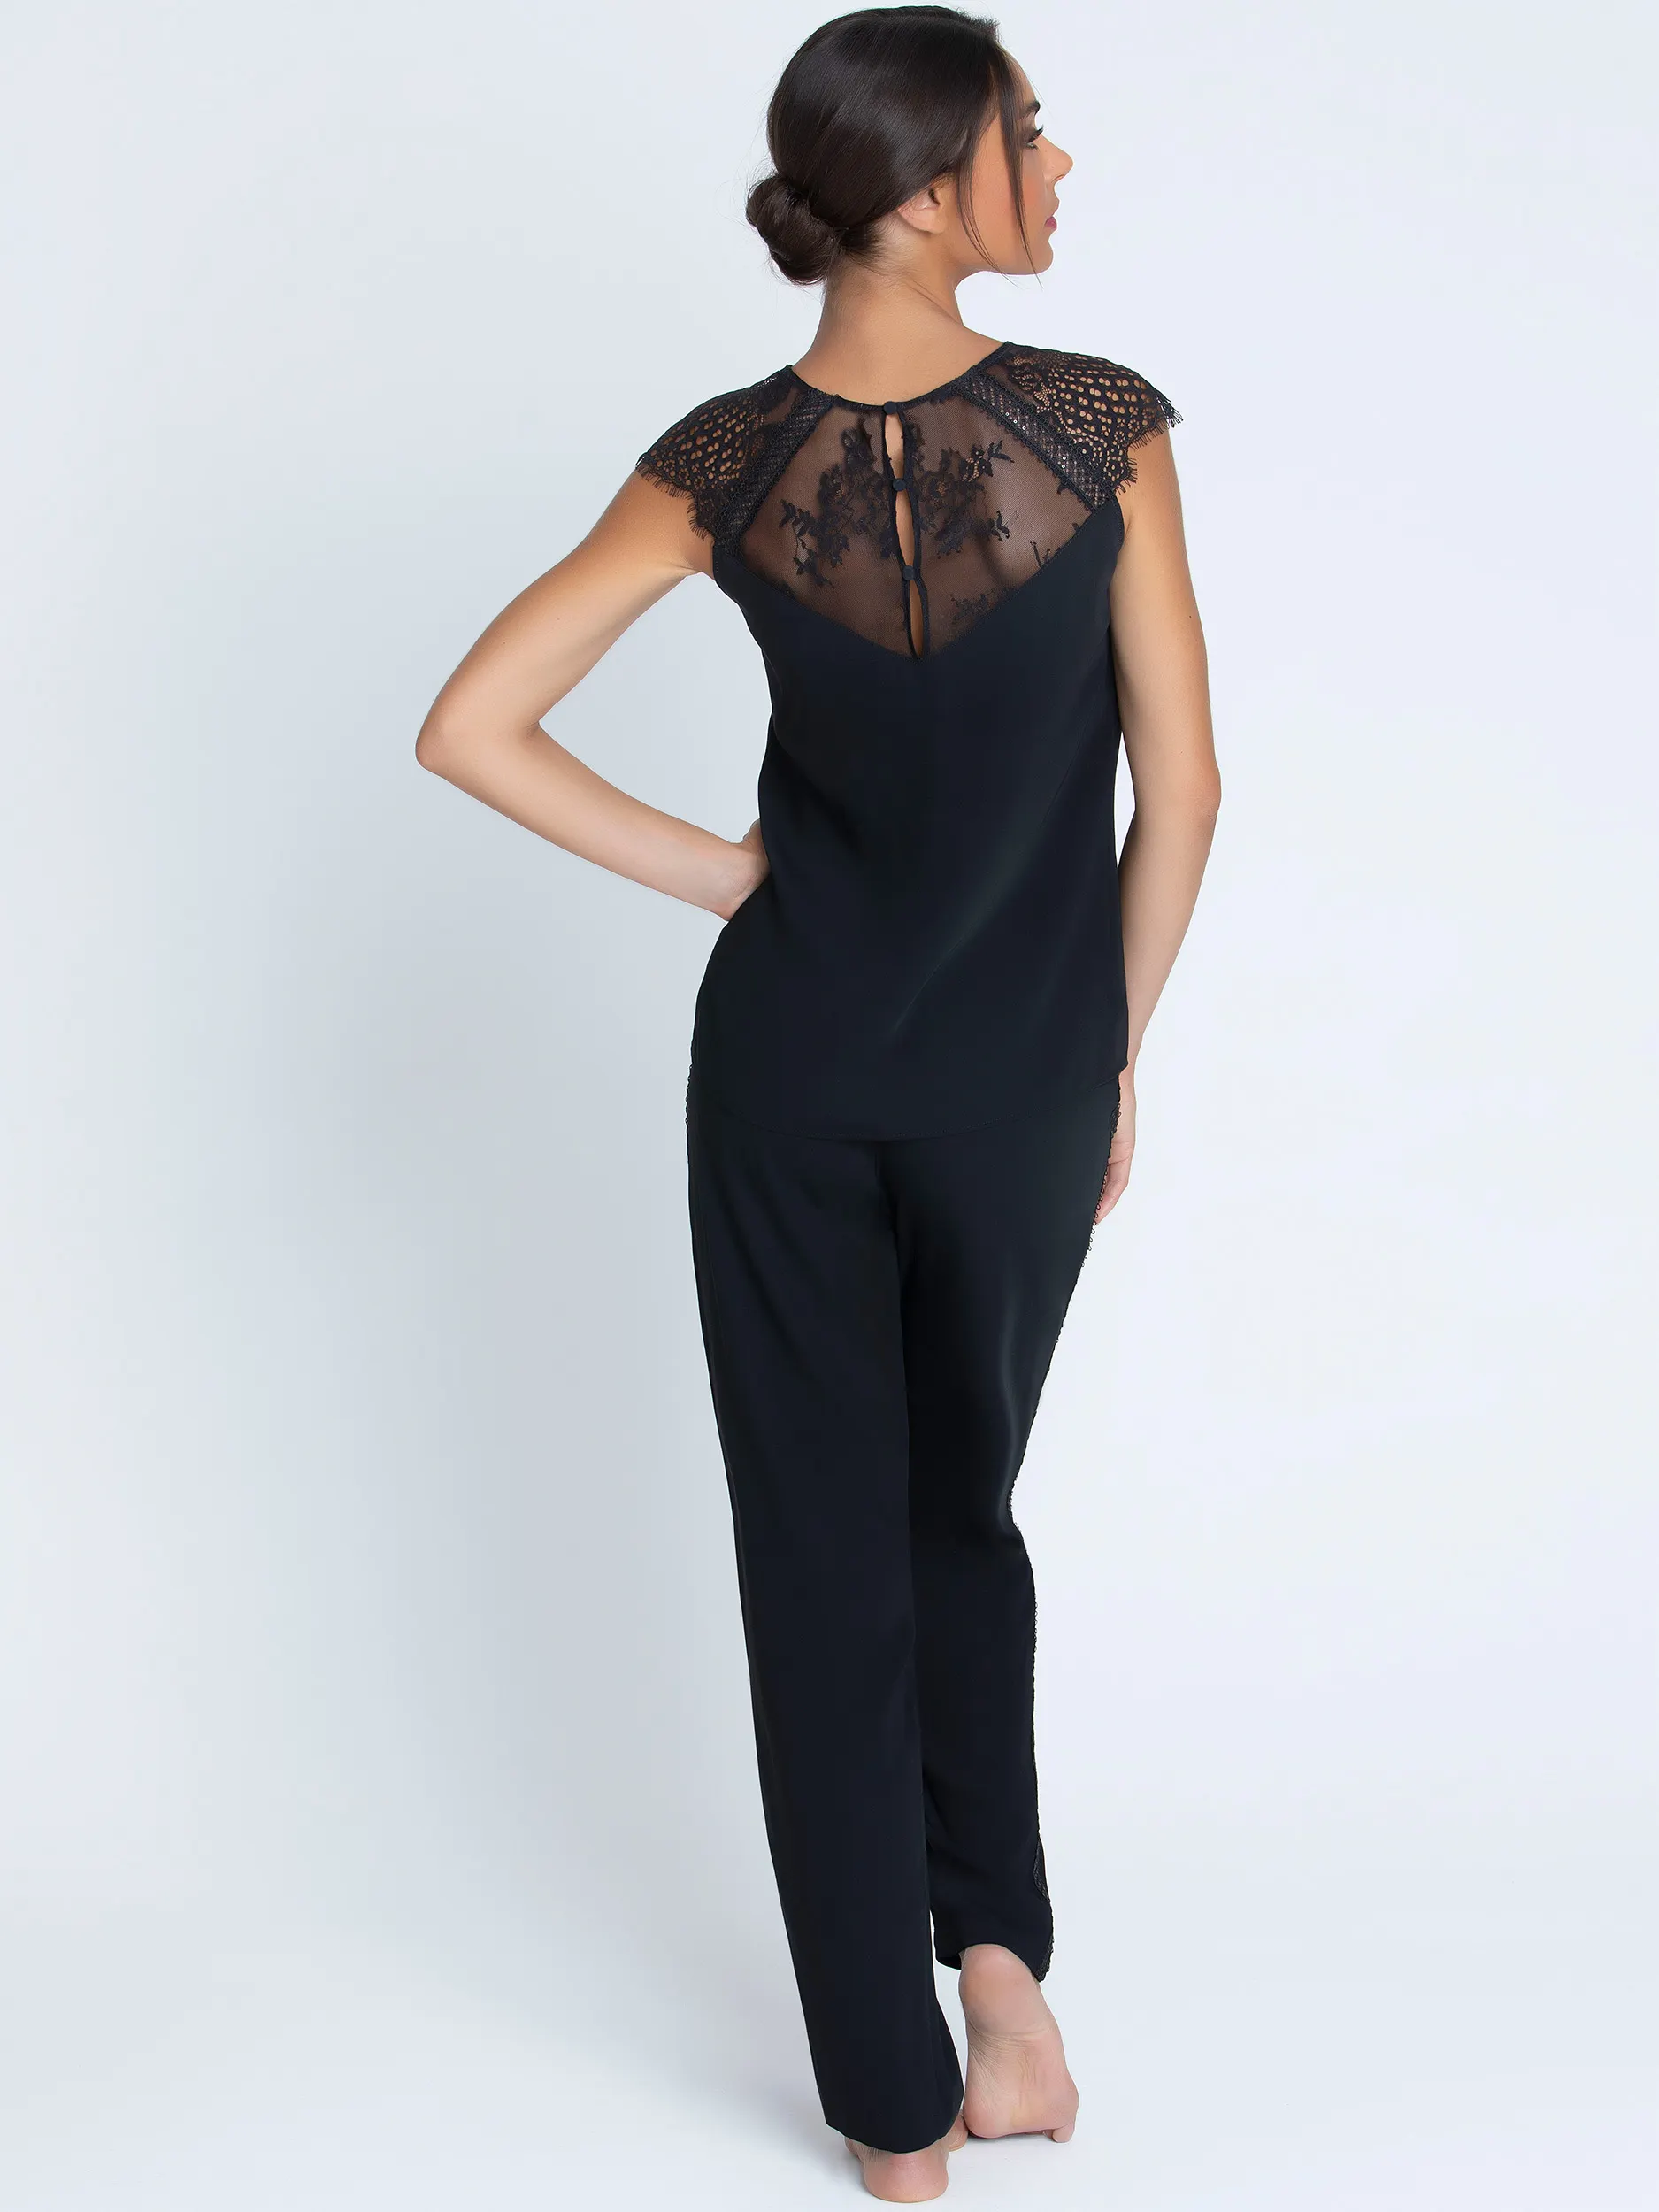 Lise Charmel , Feerie Couture- Top - Schwarz, ALH4174-NO